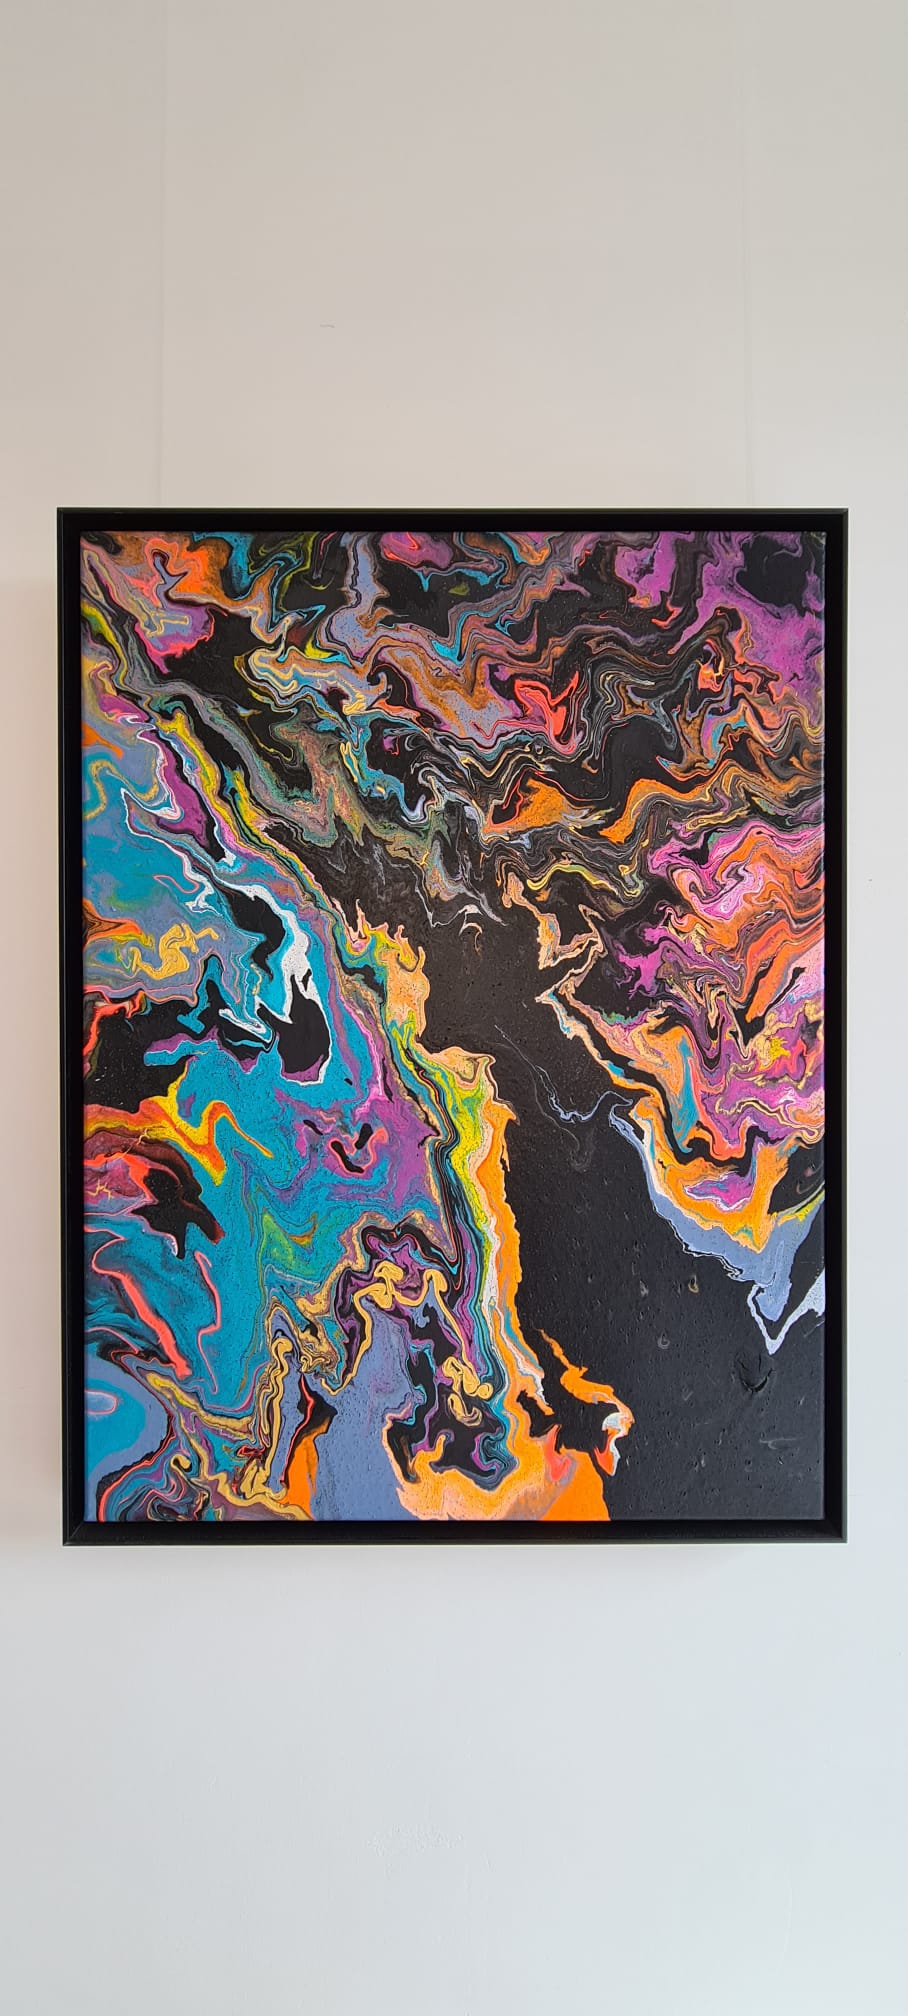 Funkin’ it – Resin with acrylics on canvas – 60x80cm – 1750 euro (framed)